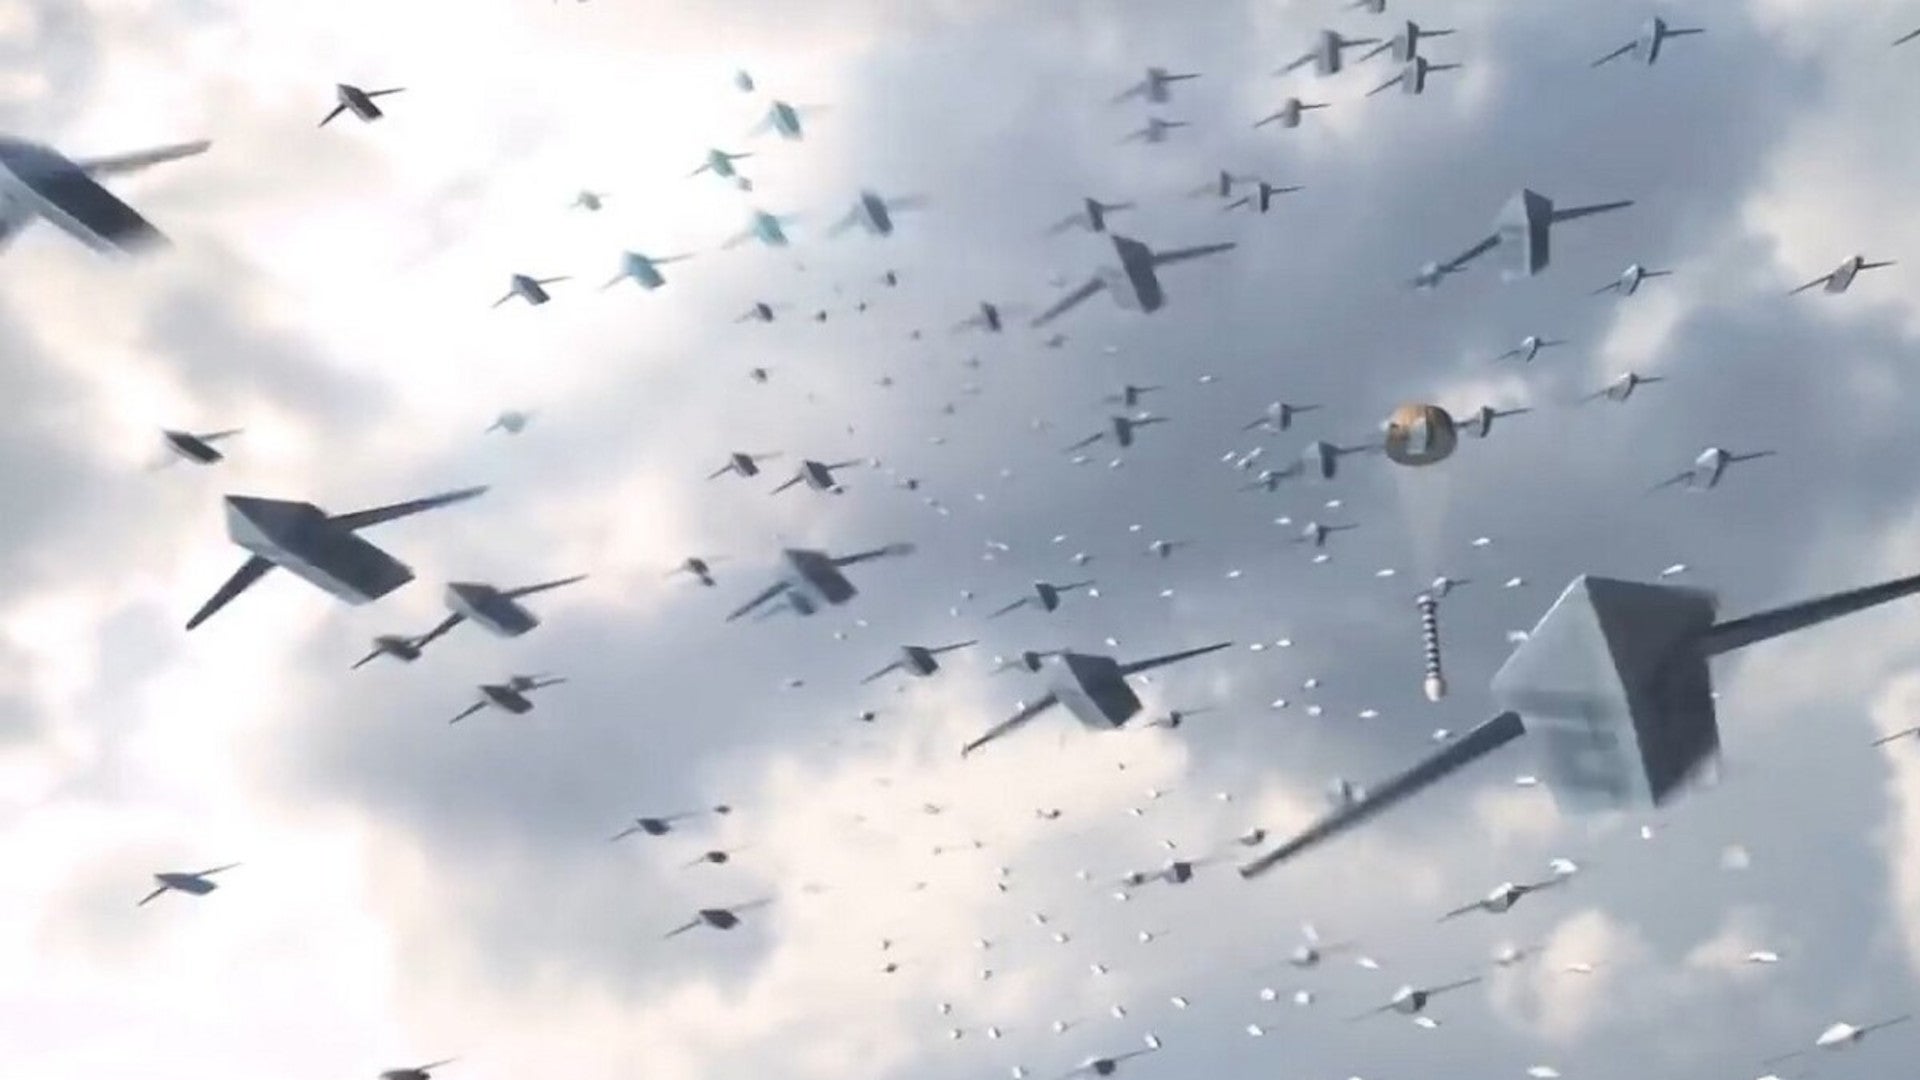 Marines Betting Big On "Critical" Air-Launched Swarming Drones